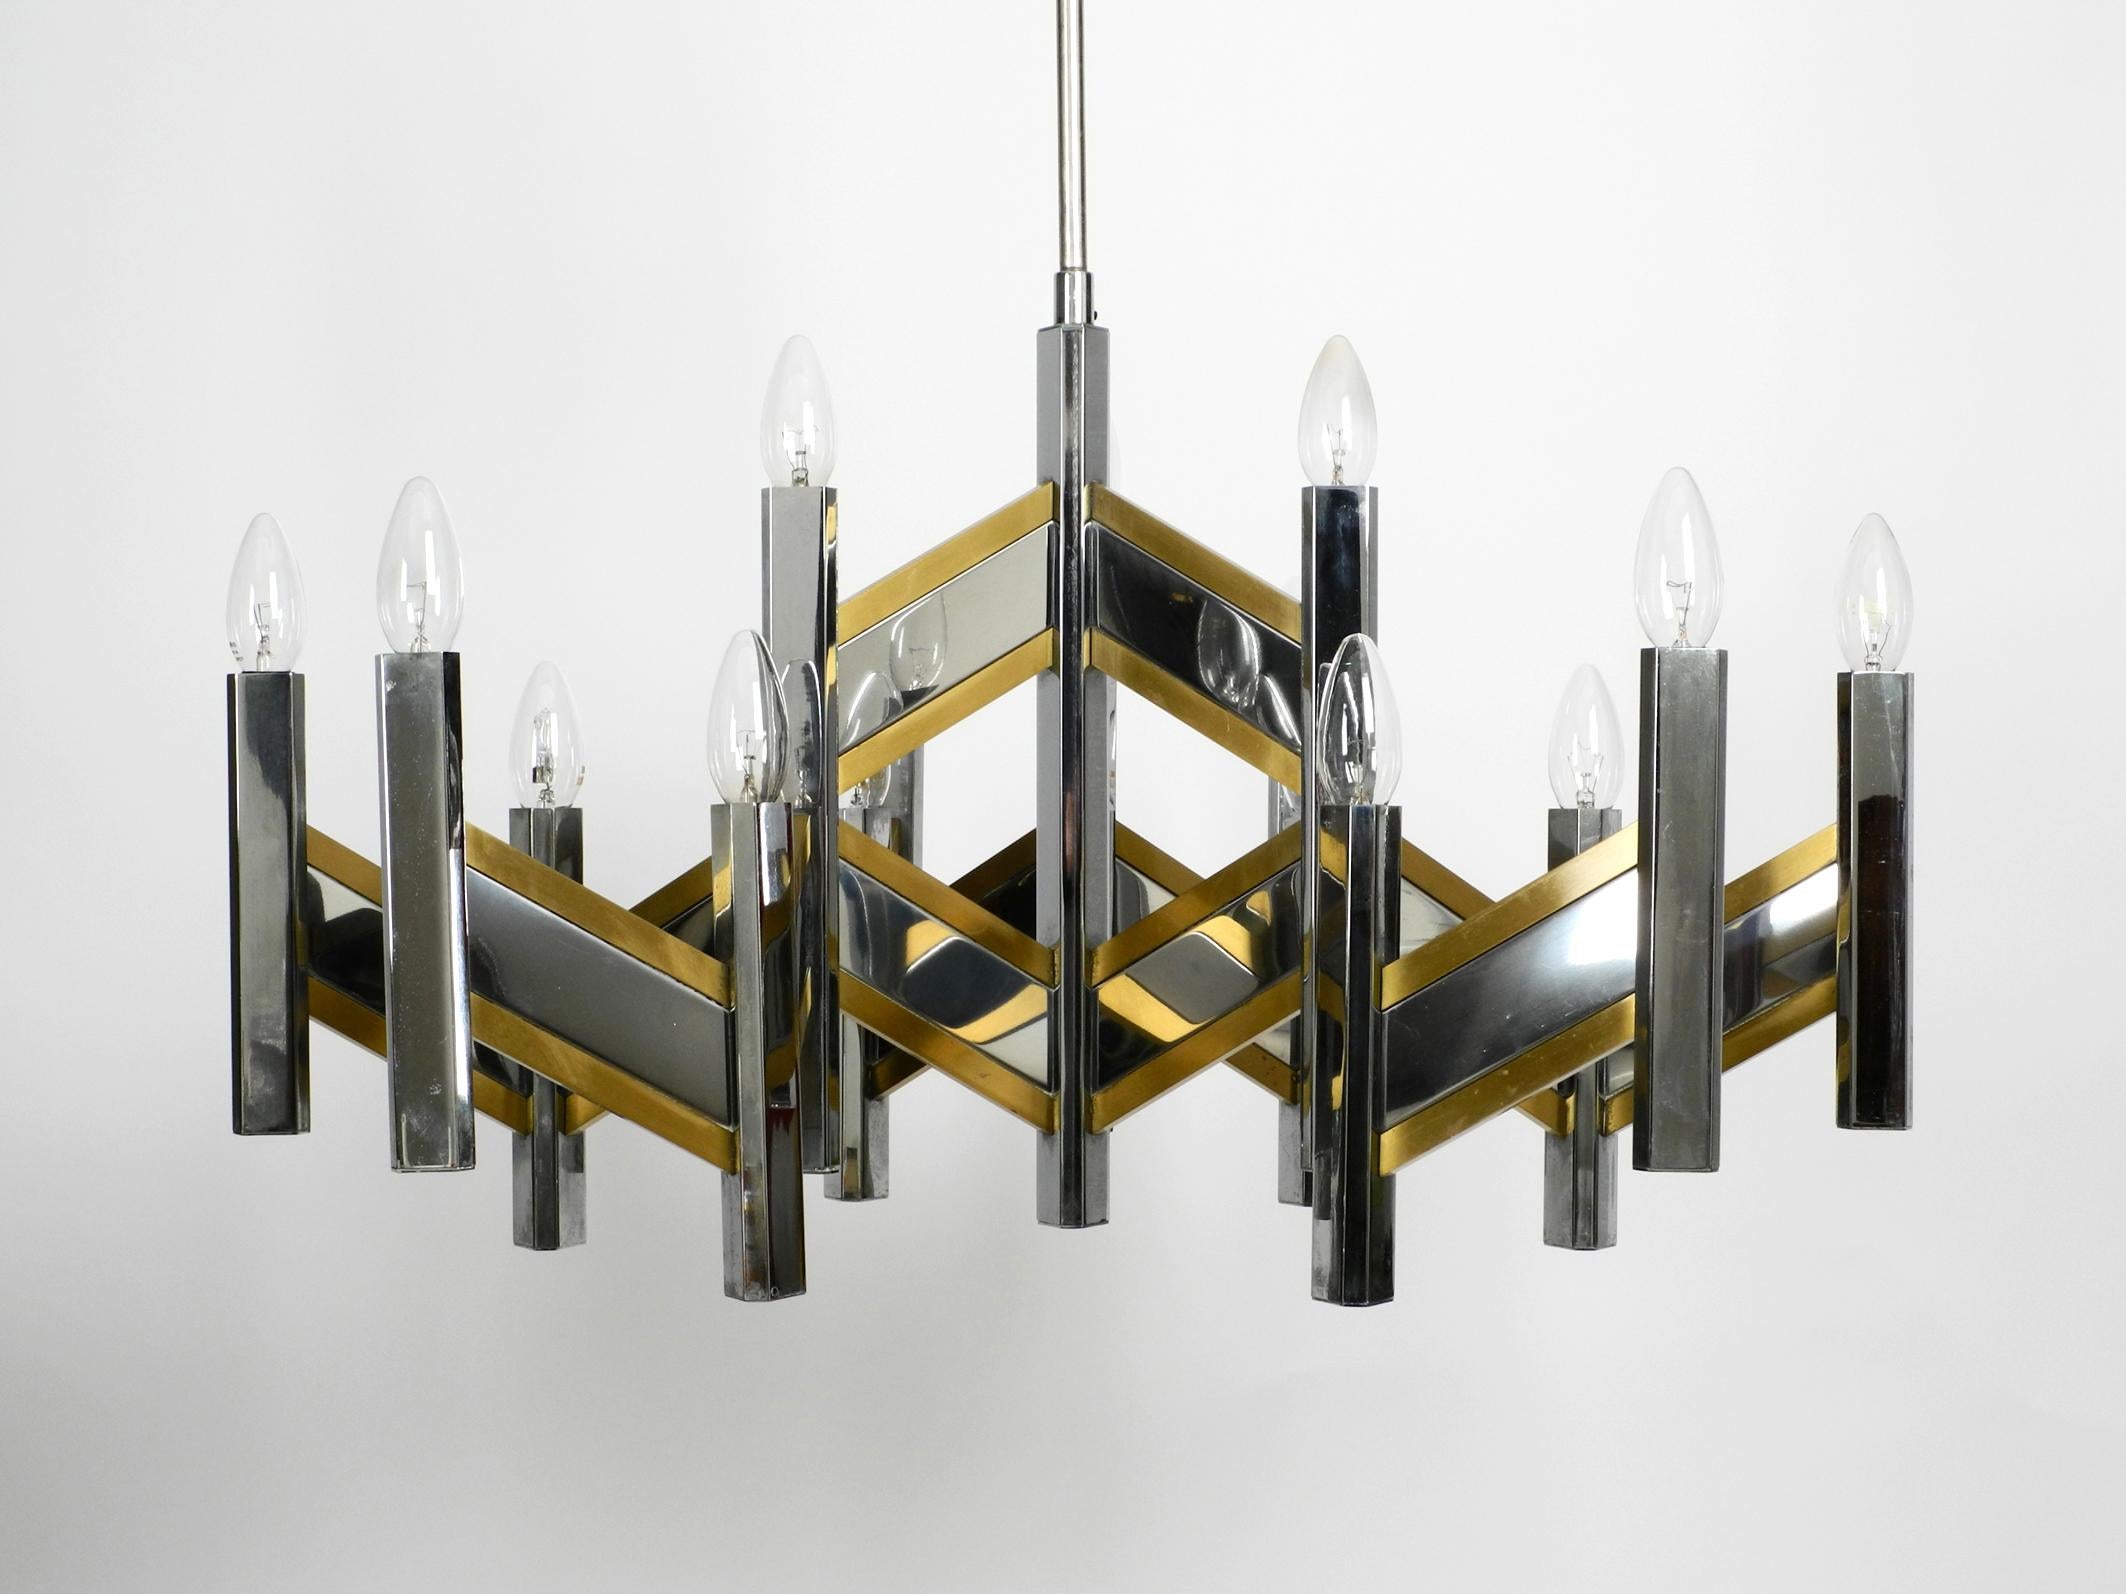 Beautiful large 1970s 15 arm chandelier by Gaetano Sciolari.
Polished to high glossy, made by chrome and brass. Great exceptional Italian design.
High quality Sciolari design with many details.
Very good vintage condition with no damages. No